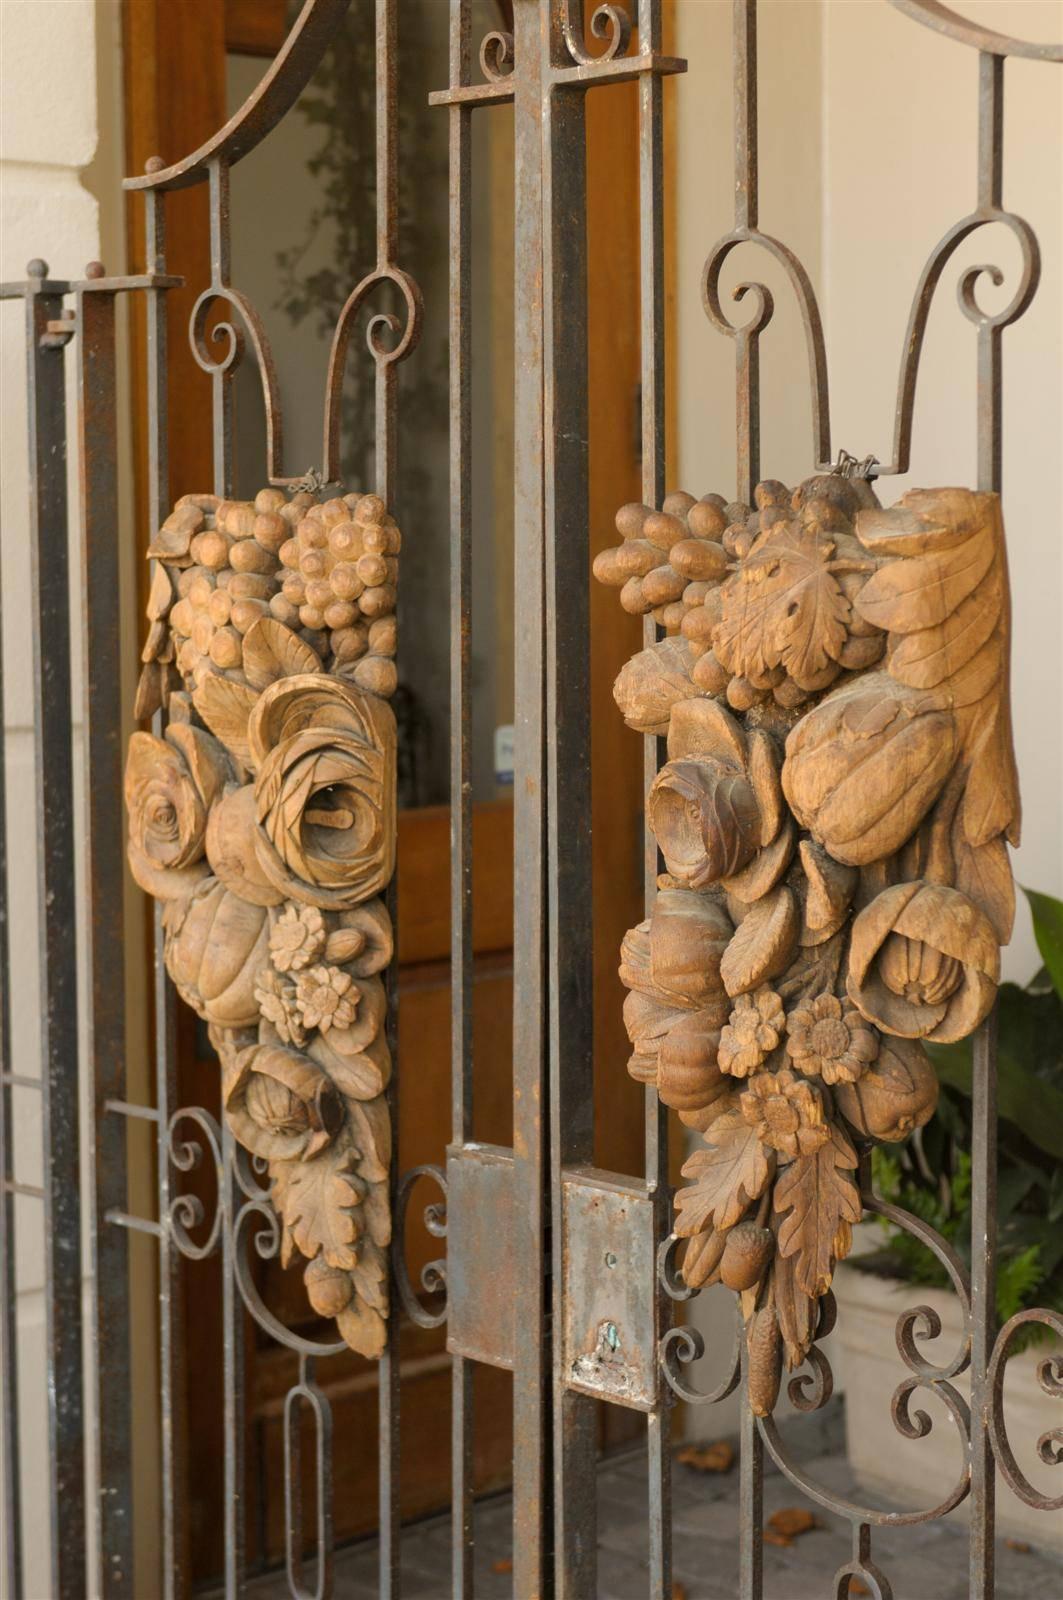 This pair of English wooden architectural carvings were made in the late 19th century in the manner of Grinling Gibbons, the Dutch-British sculptor and wood carver from the 17th-18th century who worked at Windsor Castle and Hampton Court. Sculpted